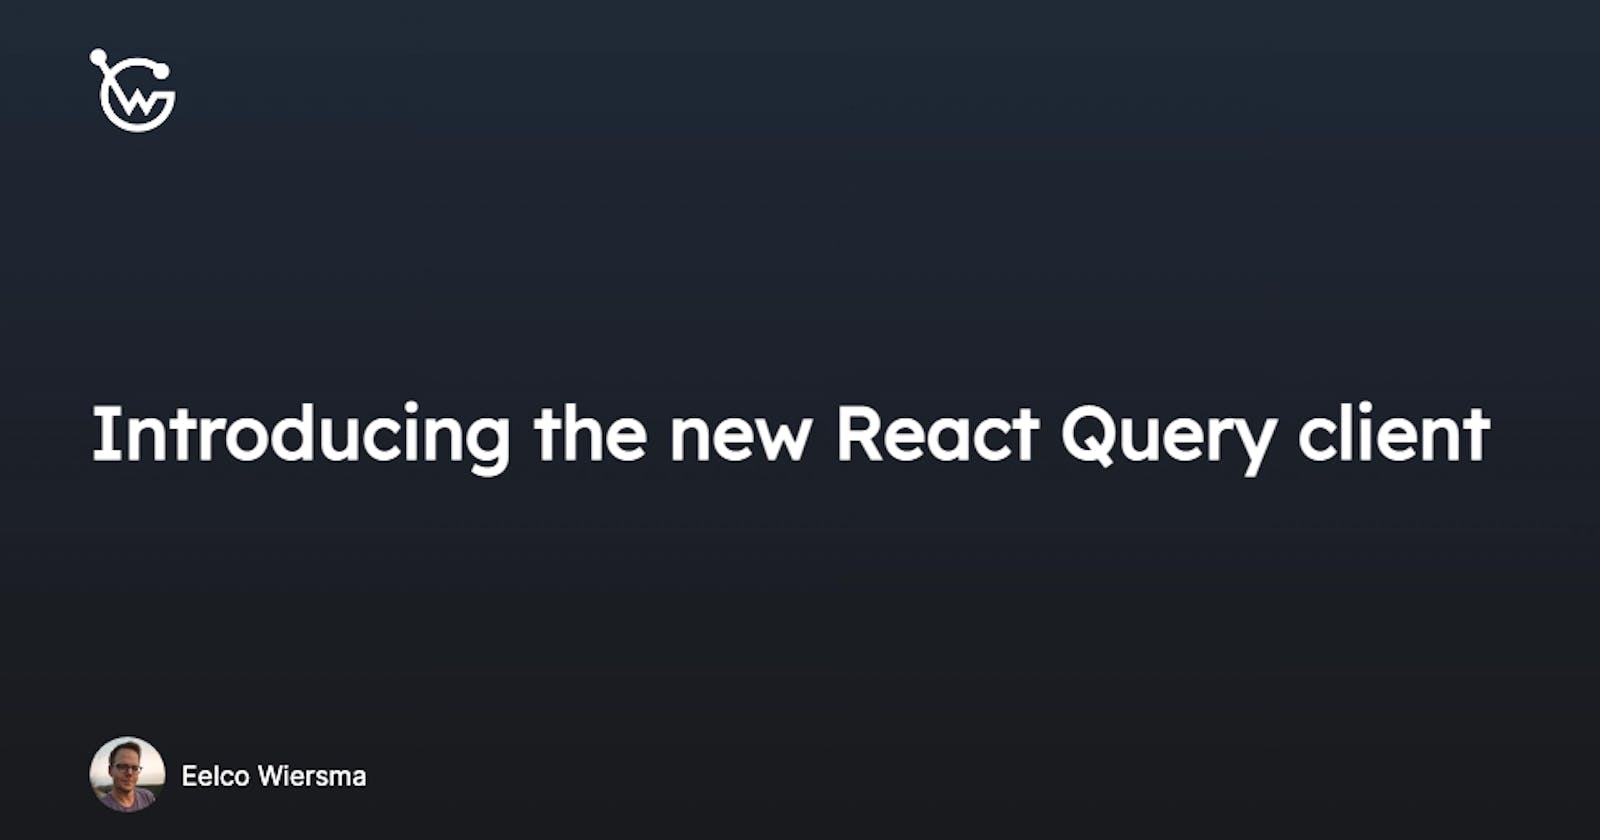 Introducing the new React Query client